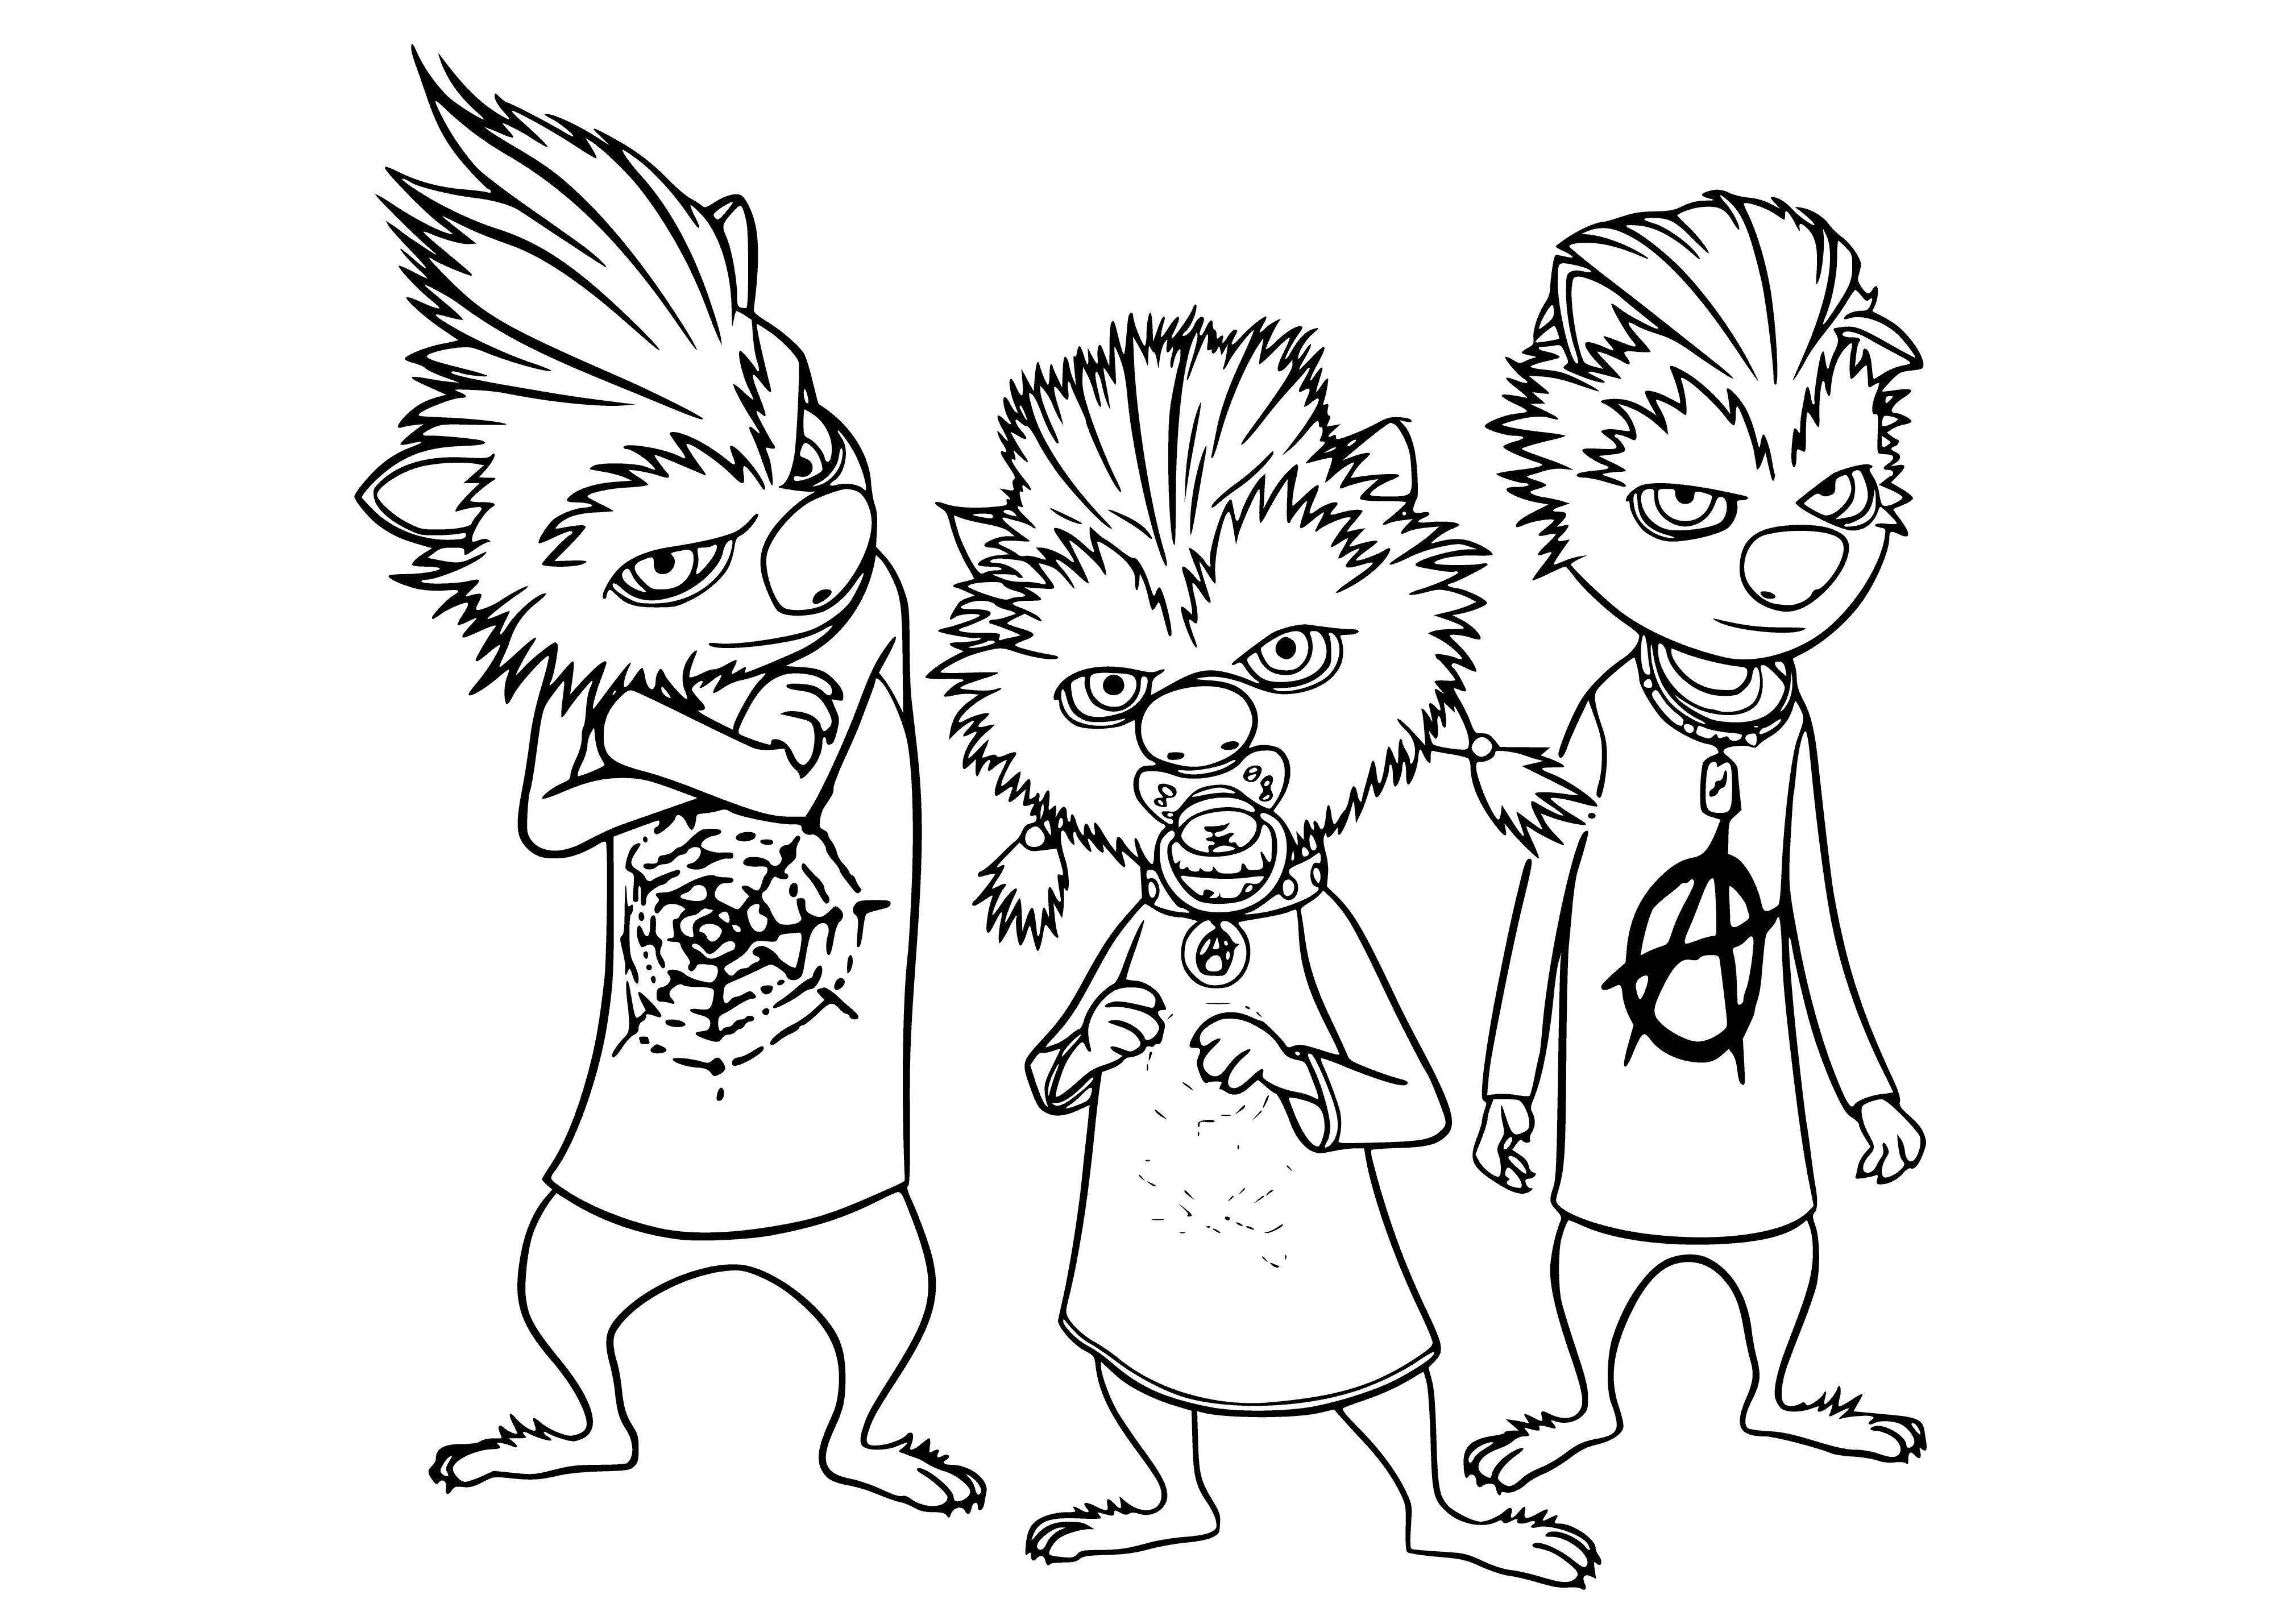 coloring page: 3 little werewolves running around in the grass, chasing & playfully running away. Brown fur & lots of fun!